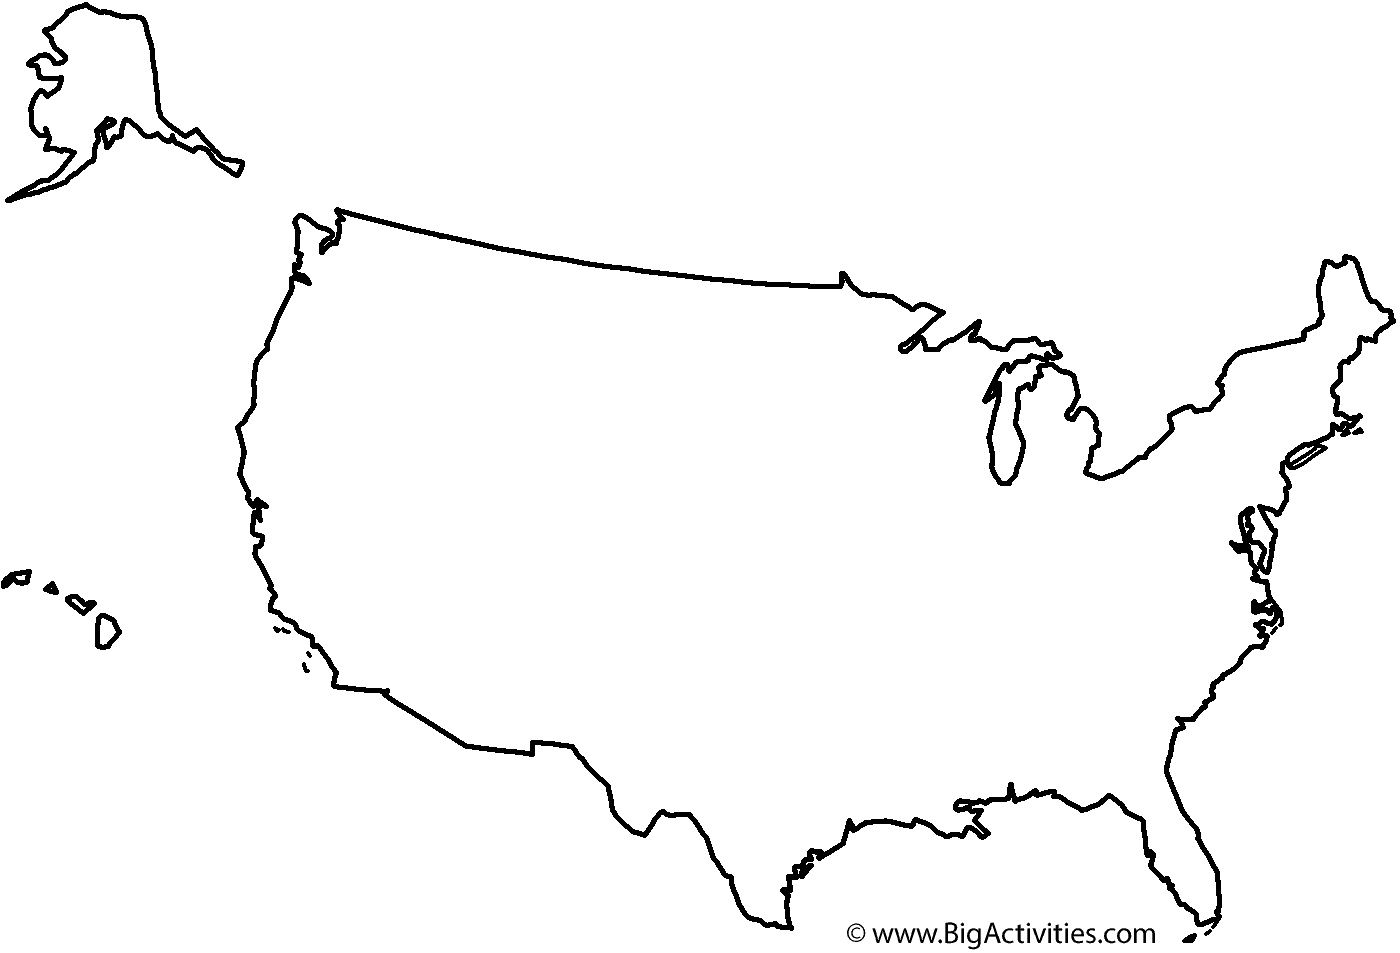 Map of the United States with title - Coloring Page (Independence Day)